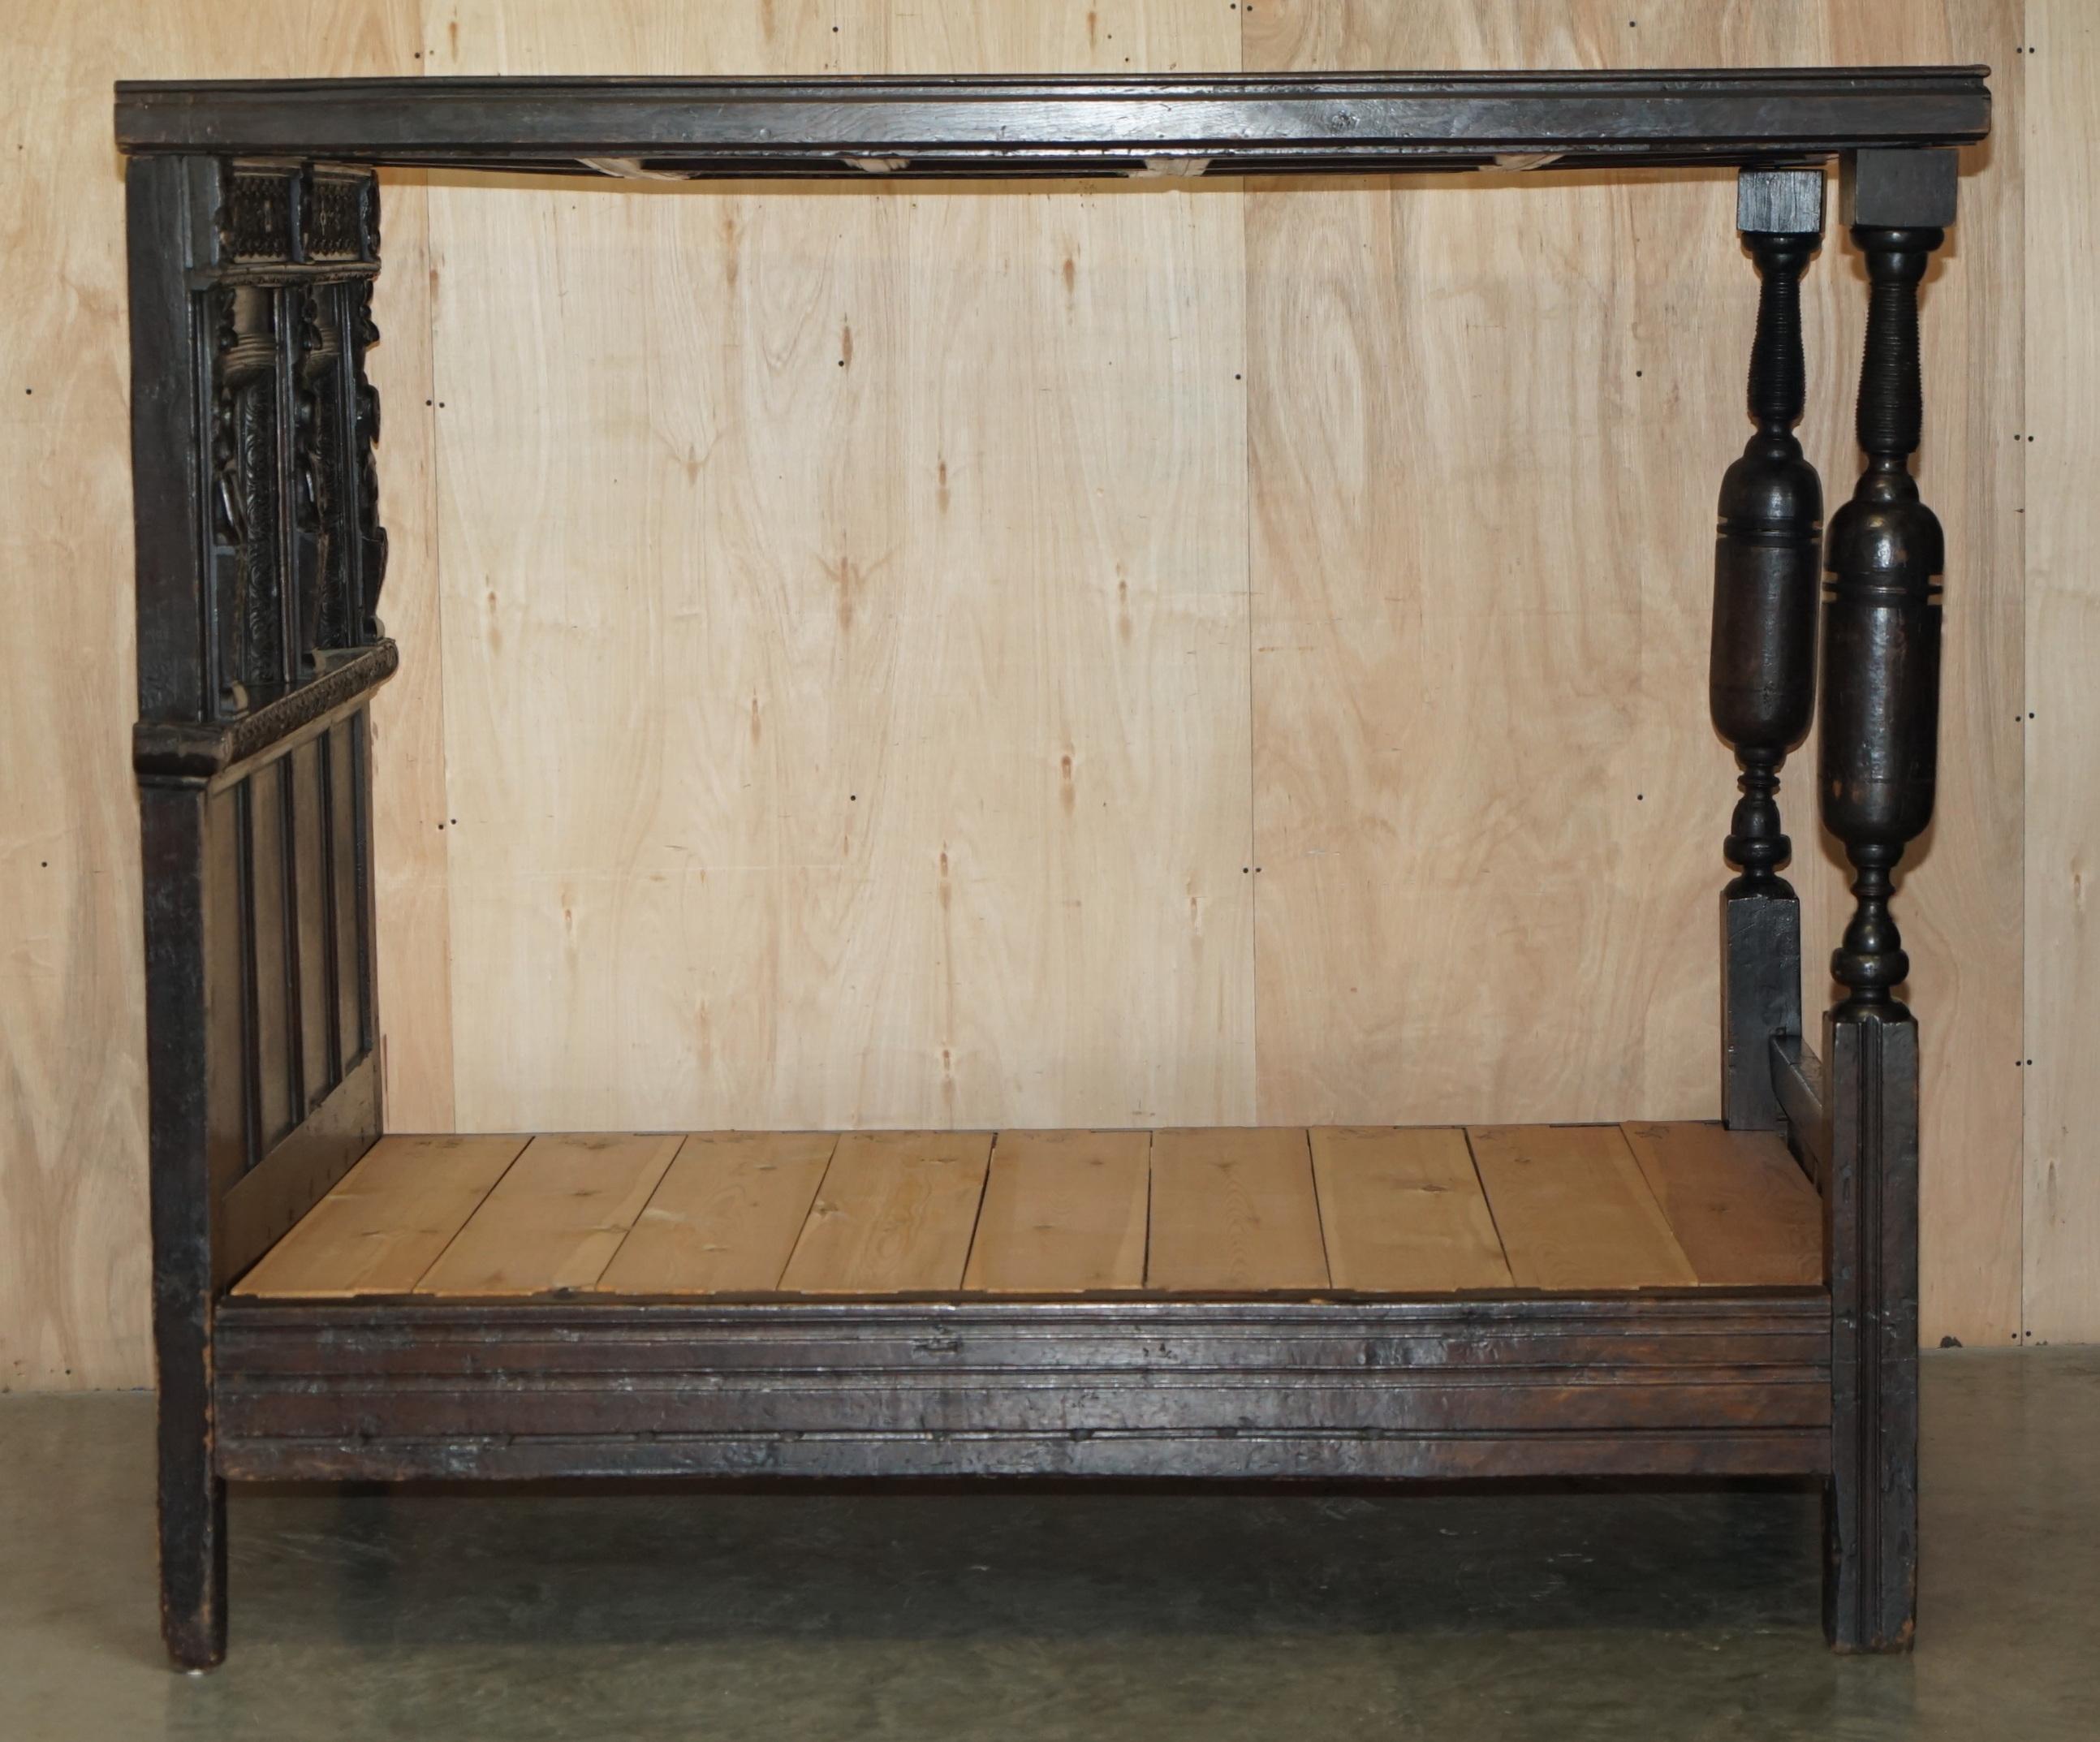 17TH CENTURY JACOBEAN WILLIAM III CIRCA 1650 ENGLiSH OAK TESTER FOUR POSTER BED For Sale 7